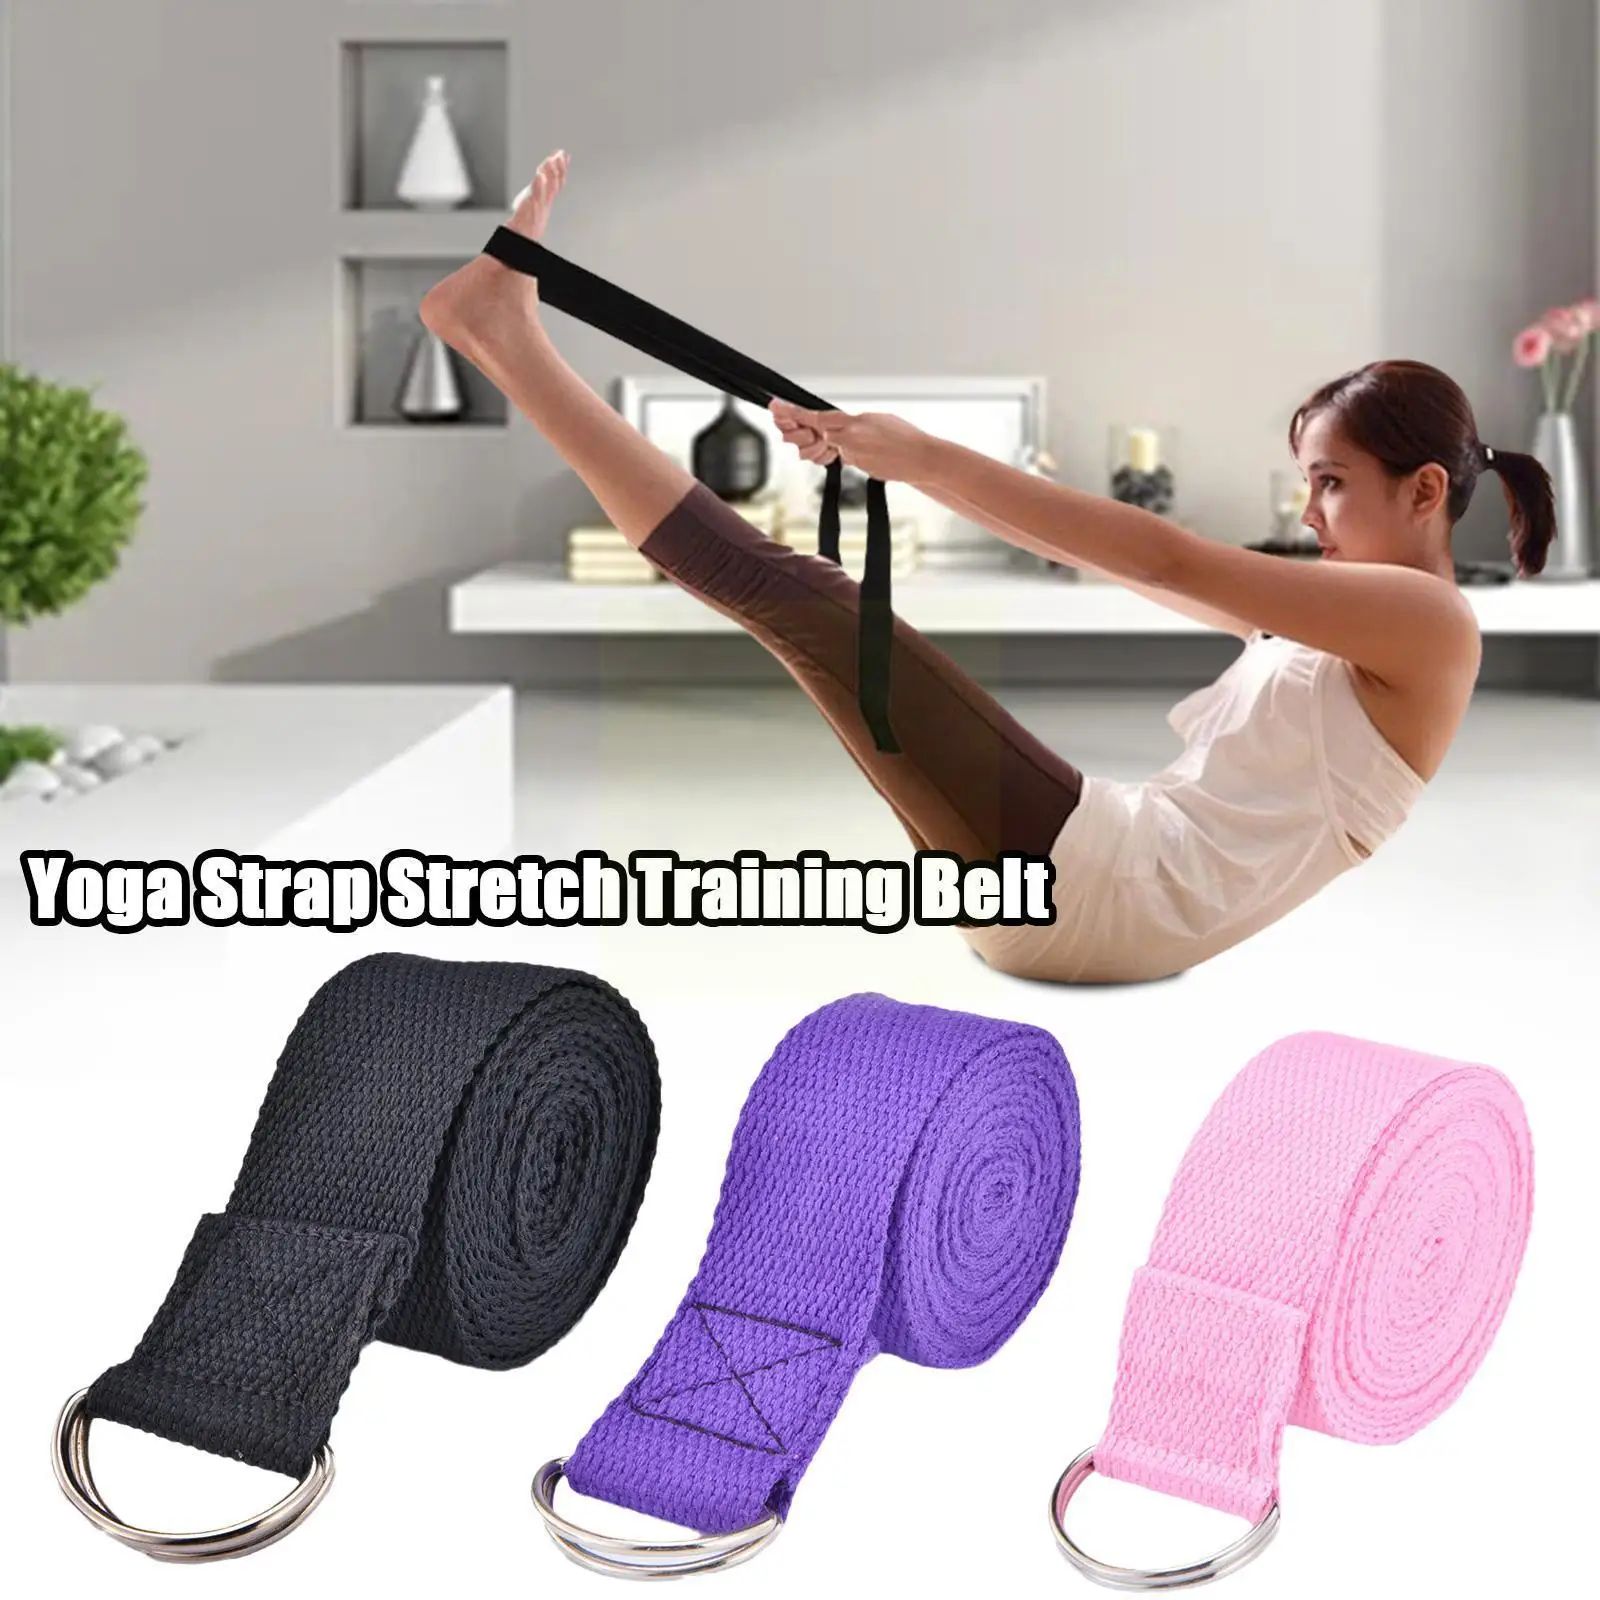 

Yoga Strap Durable Cotton Exercise Straps Adjustable D-ring Buckle Gives Flexibility For Yoga Stretching Pilates Accessorie U2u2